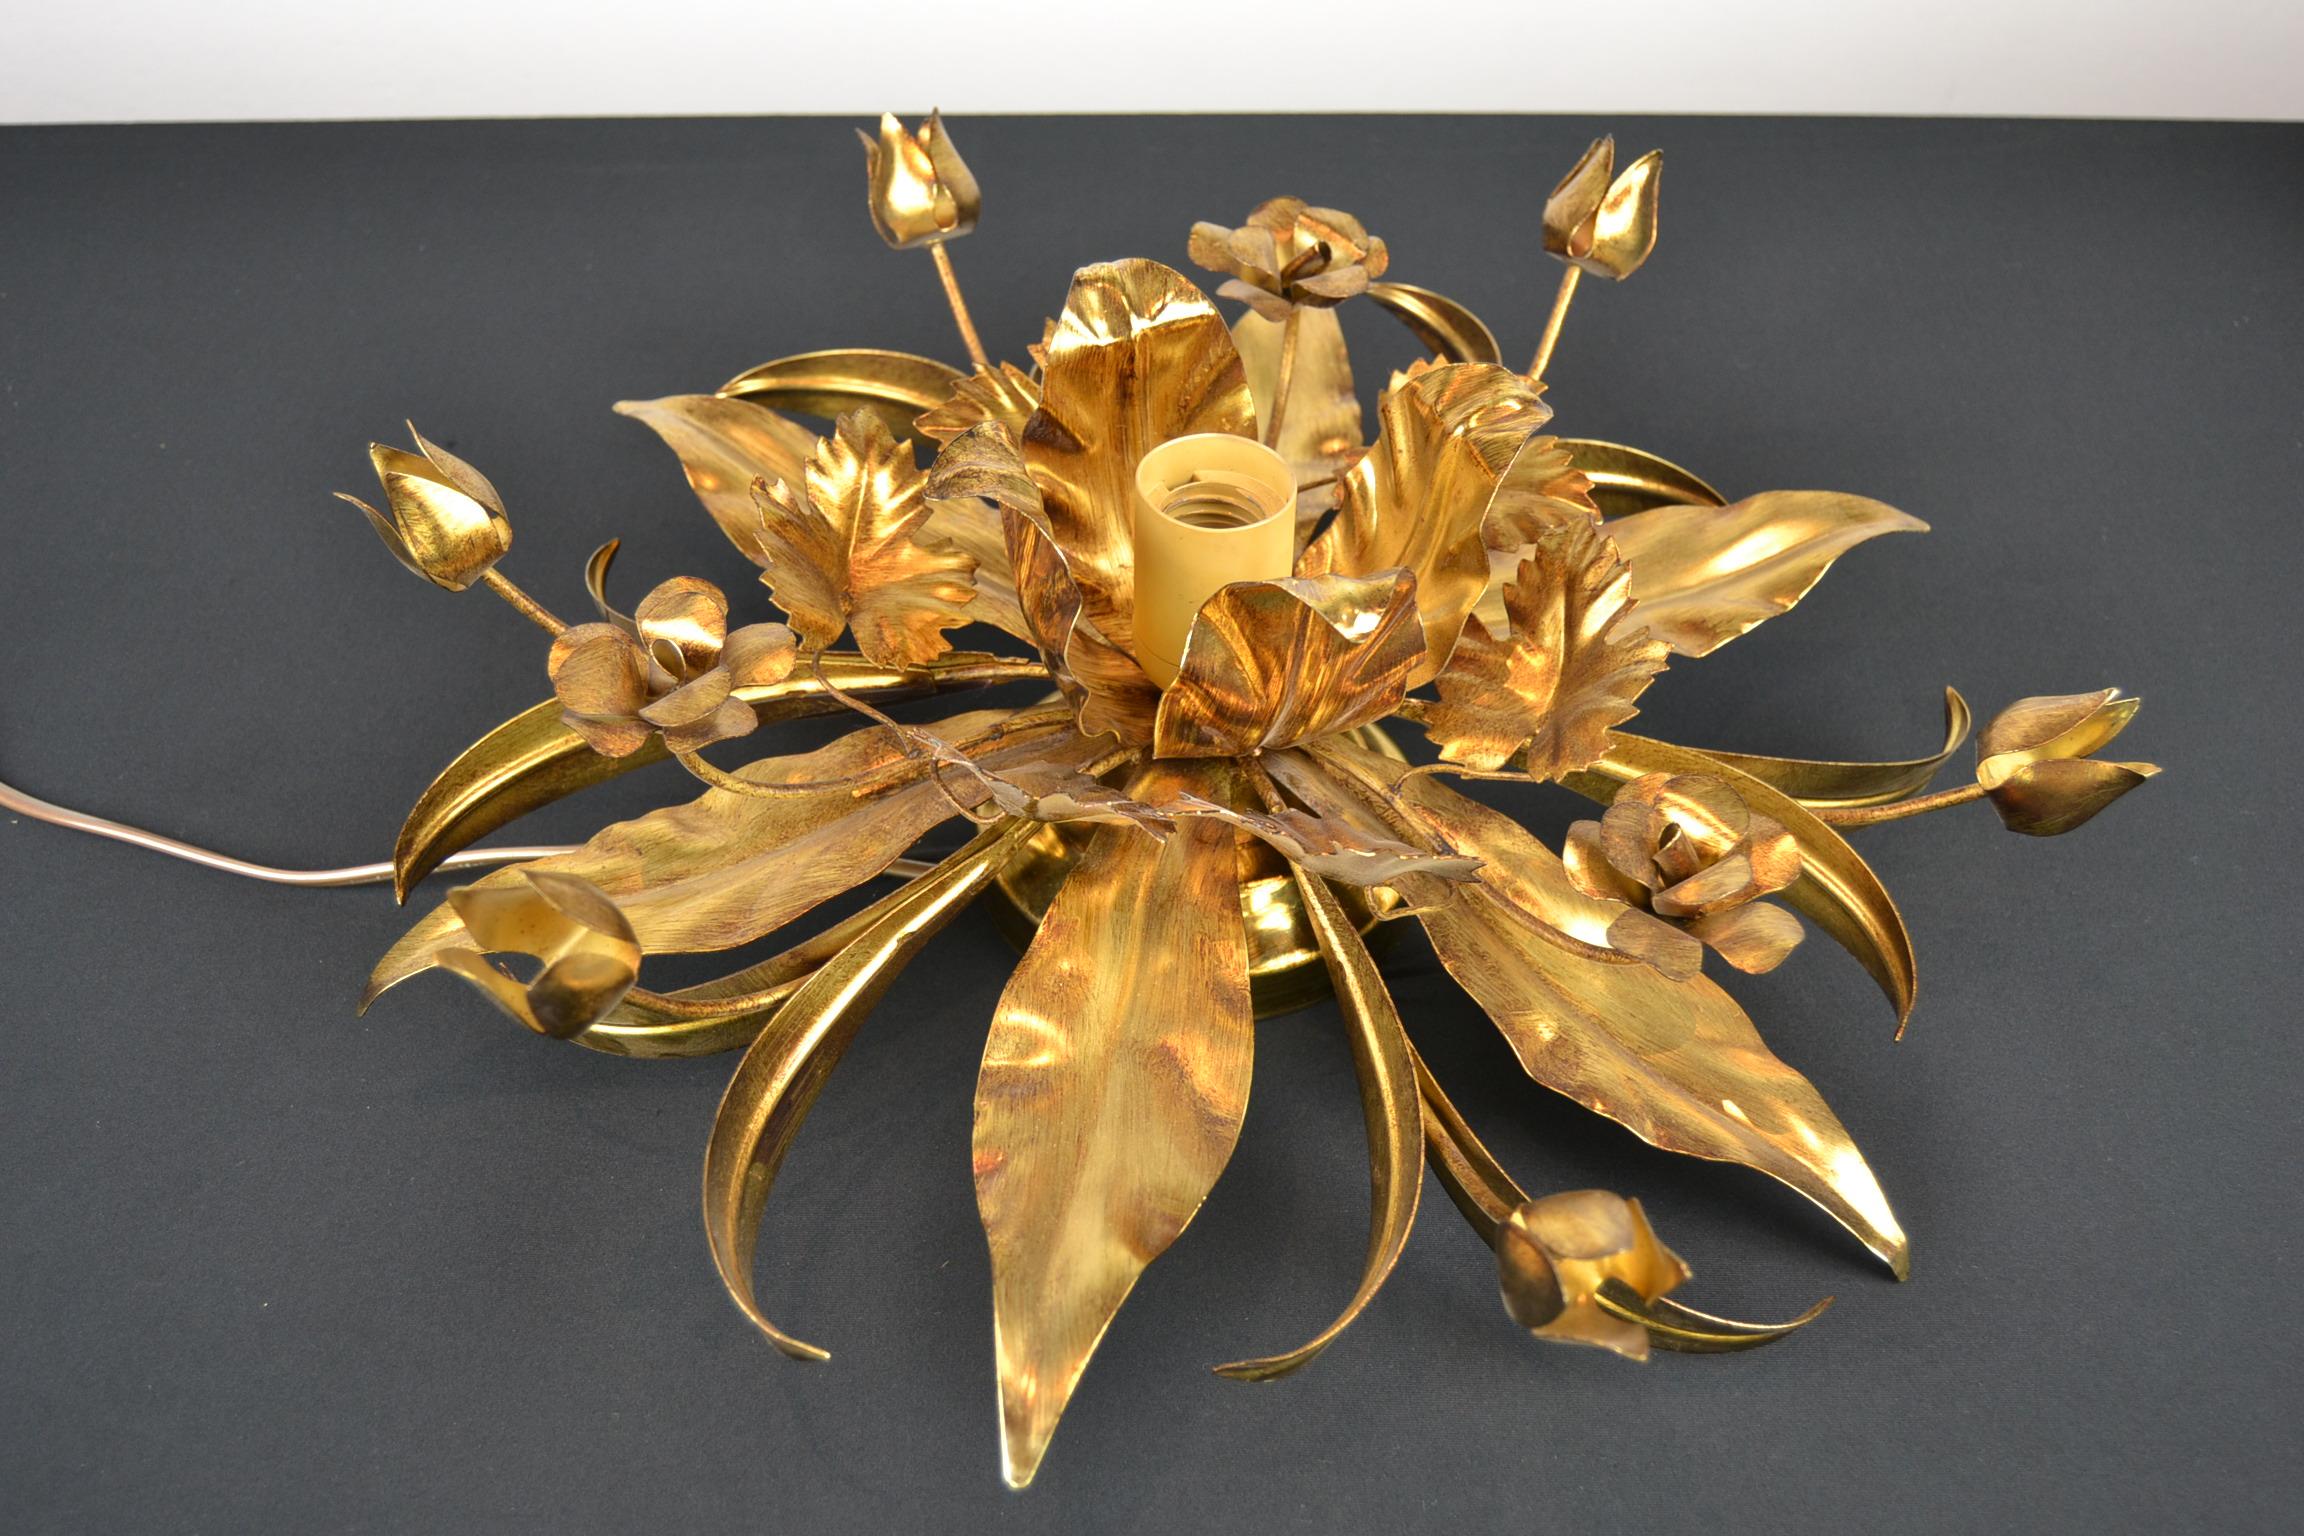 Stylish gilt metal flower flushmount or wall light.
Beautiful gilt leaves, flowers and petals around the central light bulb. 
This large floral light needs in the middle an E27 light bulb. 

Bulb is not included. We used on the pictures one with a